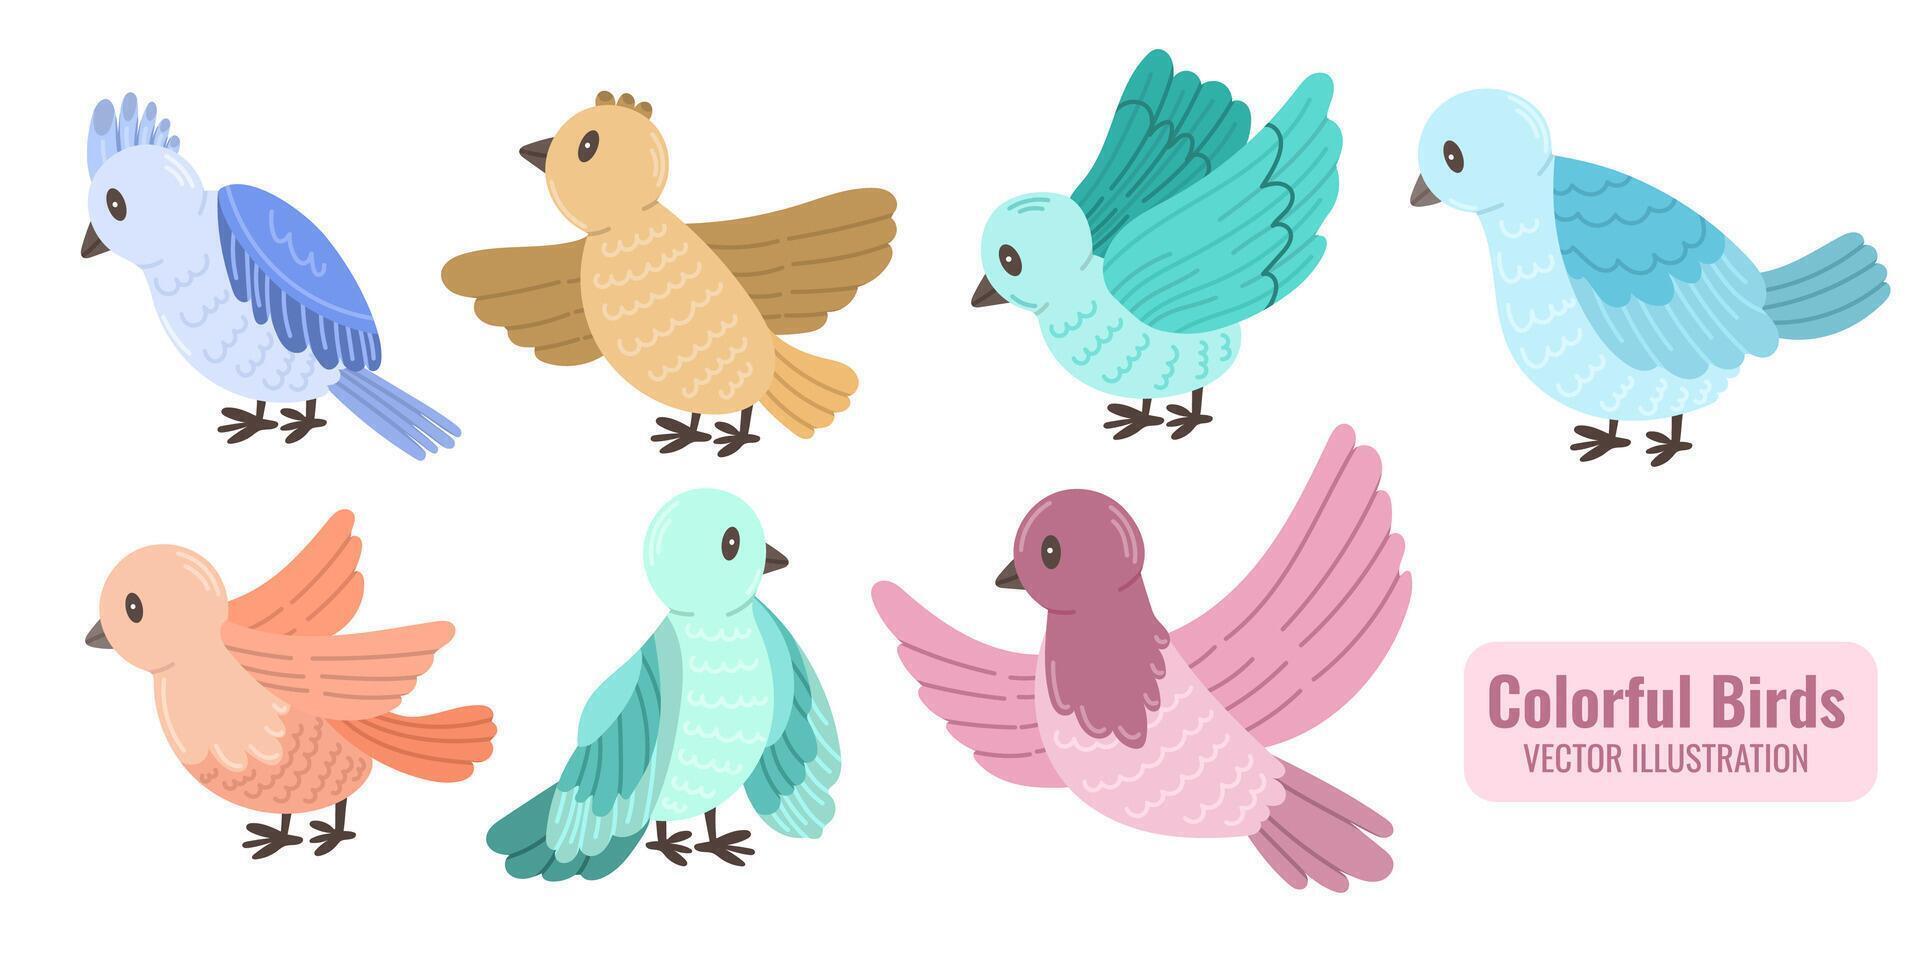 Multi-colored birds on a white background. Flat vector